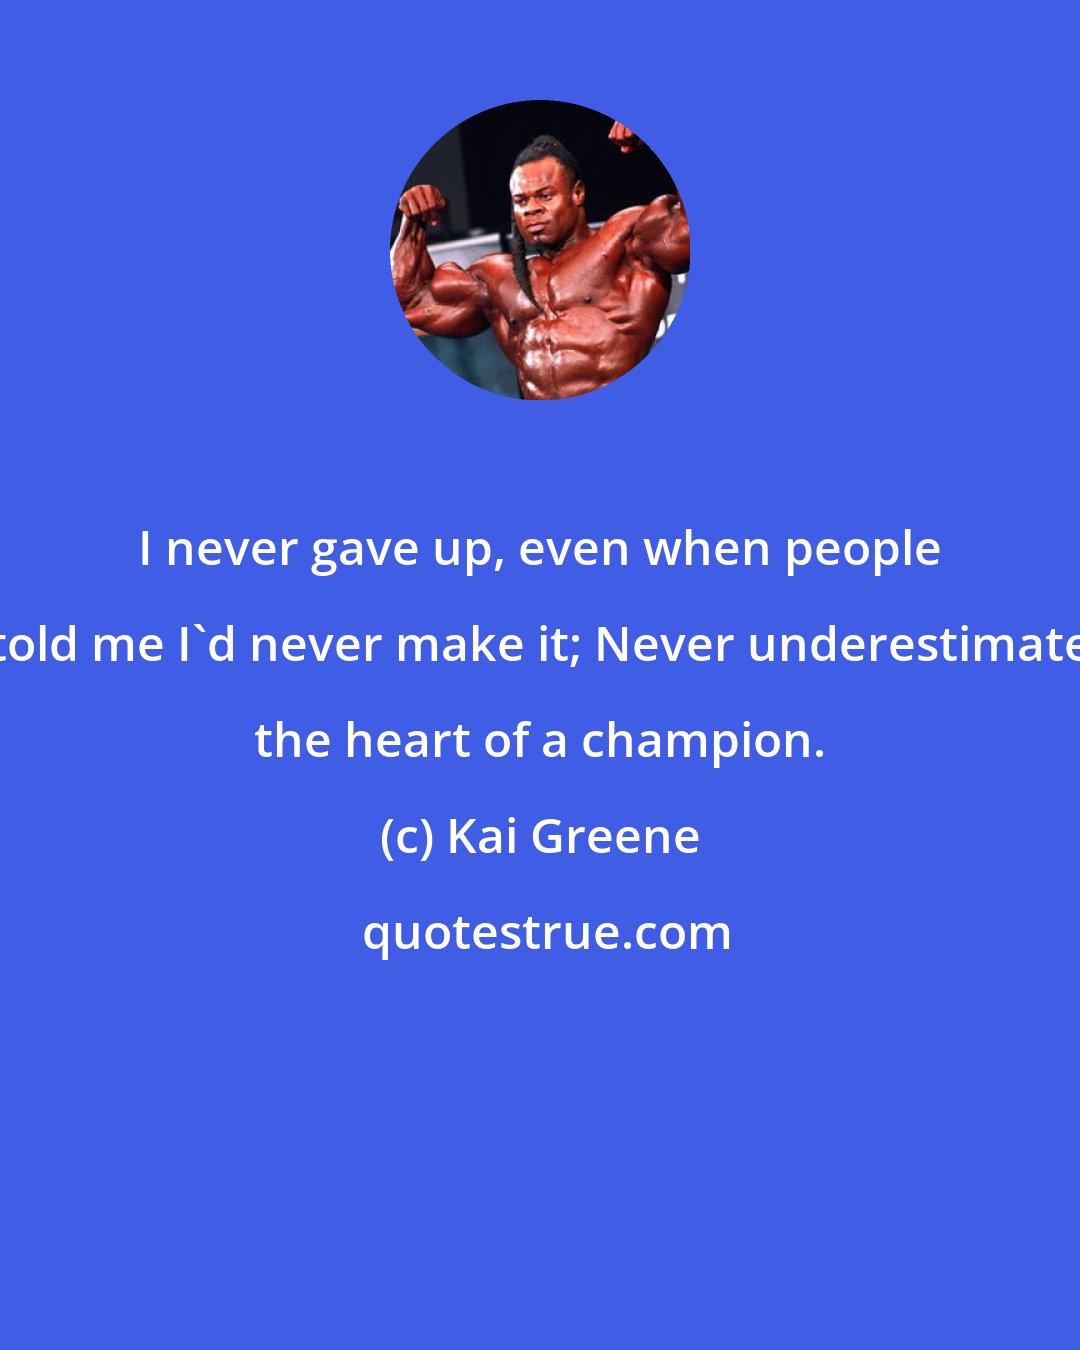 Kai Greene: I never gave up, even when people told me I'd never make it; Never underestimate the heart of a champion.